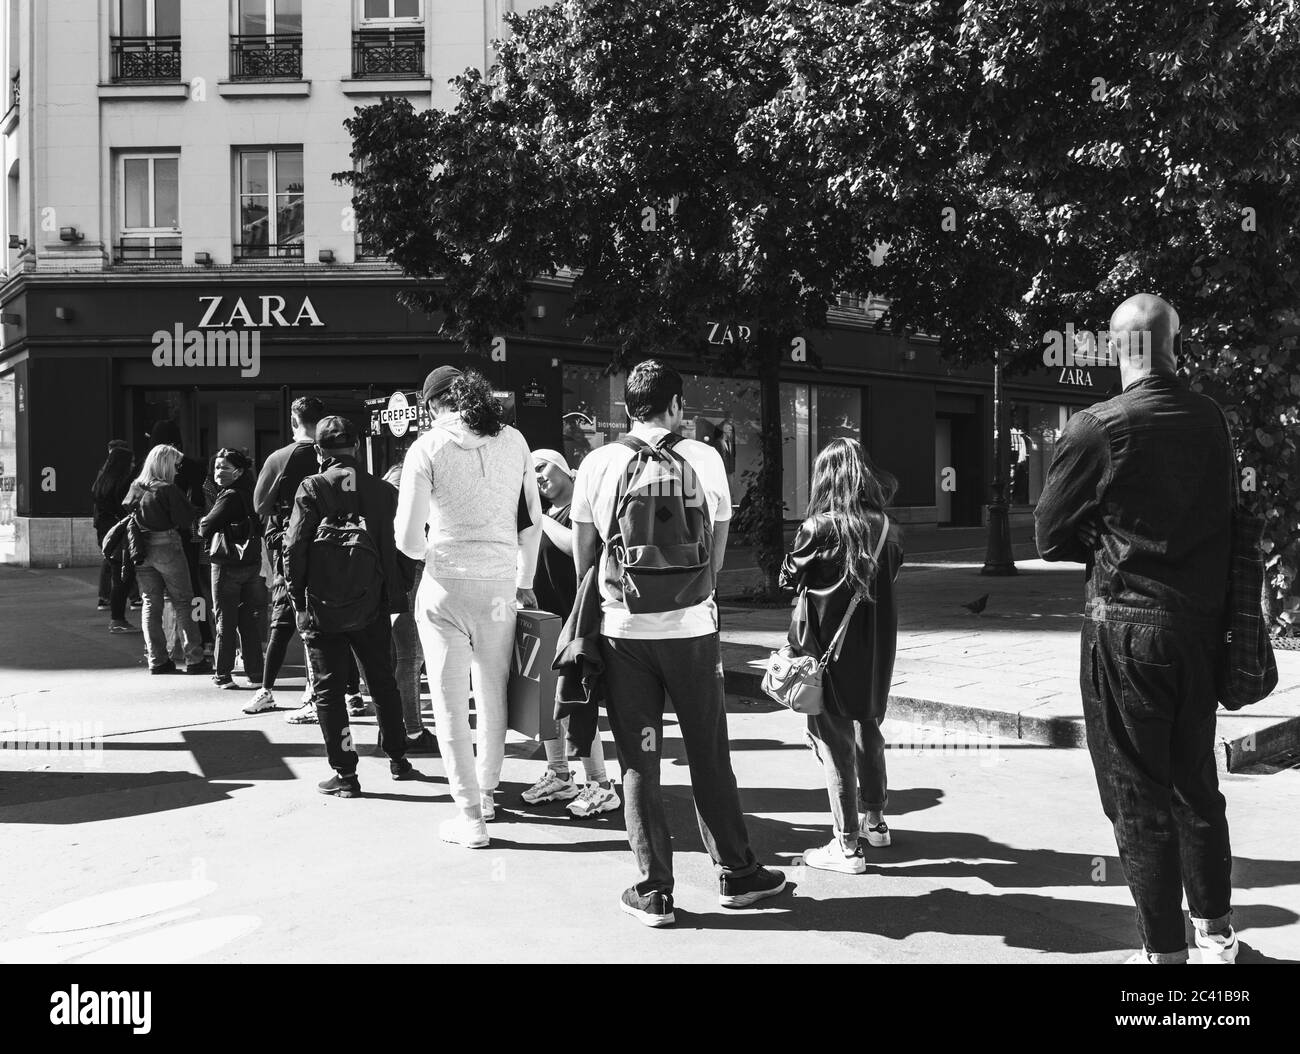 Paris, France - May 15, 2020: People wearing protective masks waiting in  line (keeping social distance) to enter Zara fashion store at Rivoli street  Stock Photo - Alamy